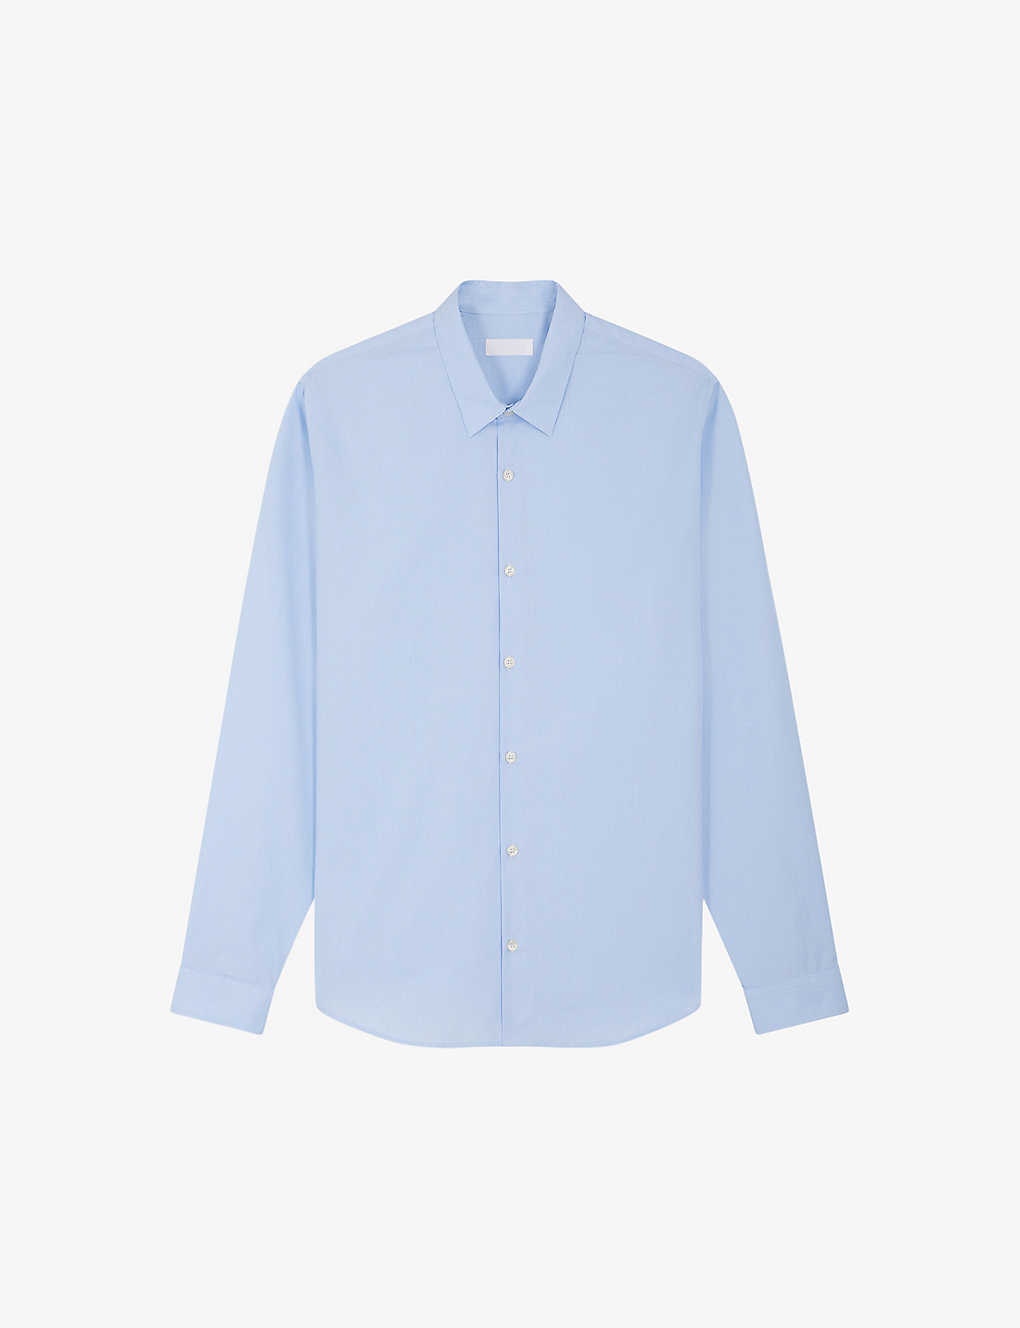 Balibaris Jay Semi-fitted Striped Cotton Shirt In Light Blue/white